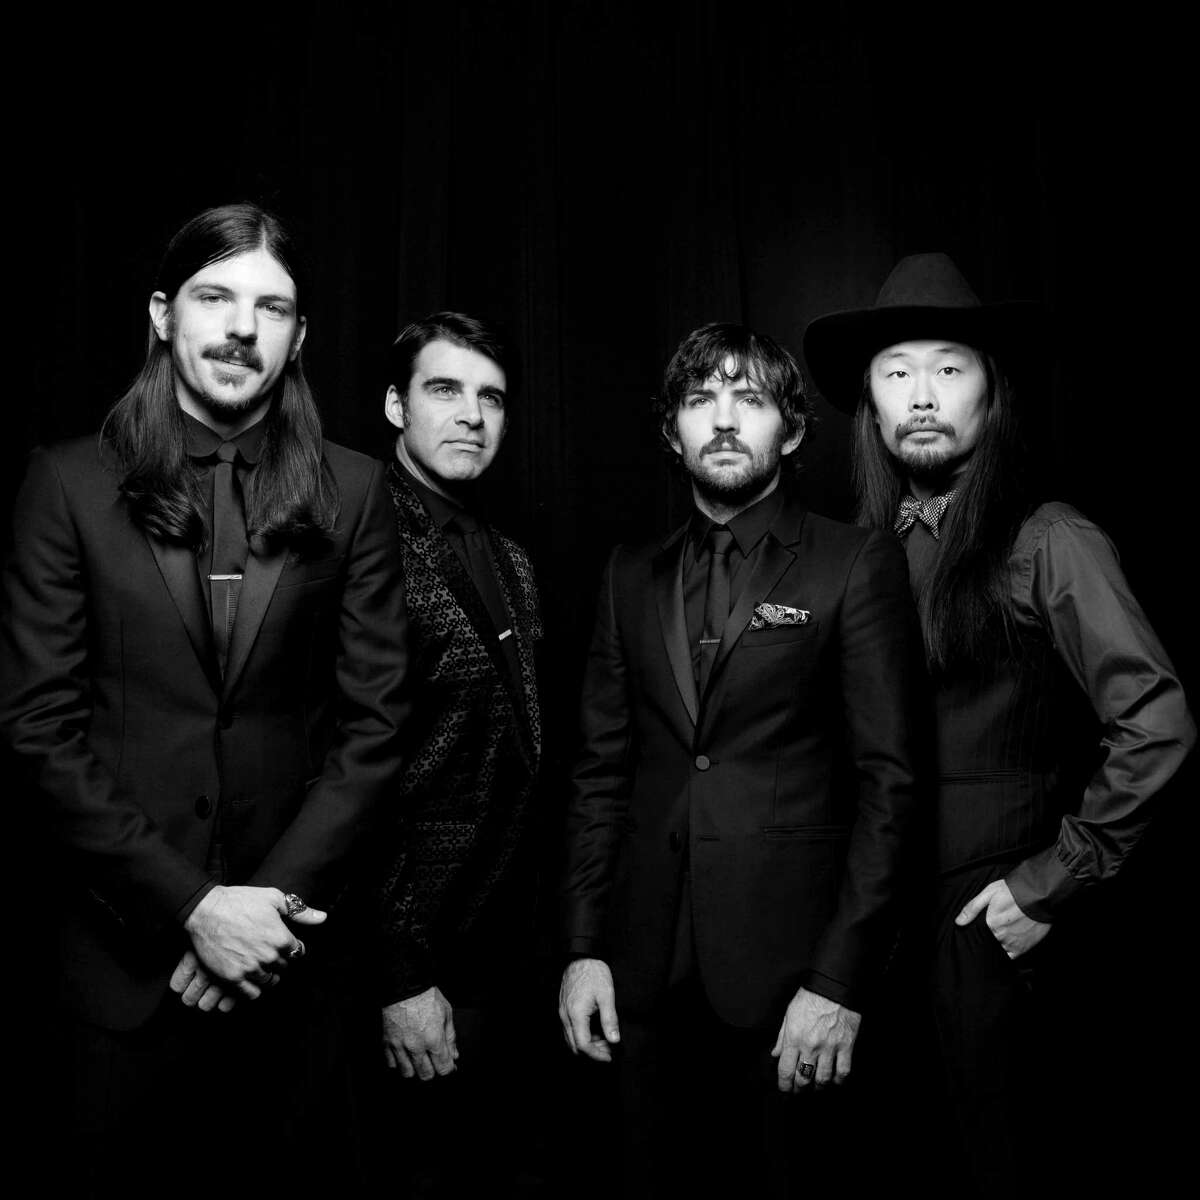 The Avett Brothers have lined up a March 31 date at the Smart Financial Centre in Sugar Land. >>Keep clicking to see more great concerts lined up for the Houston area